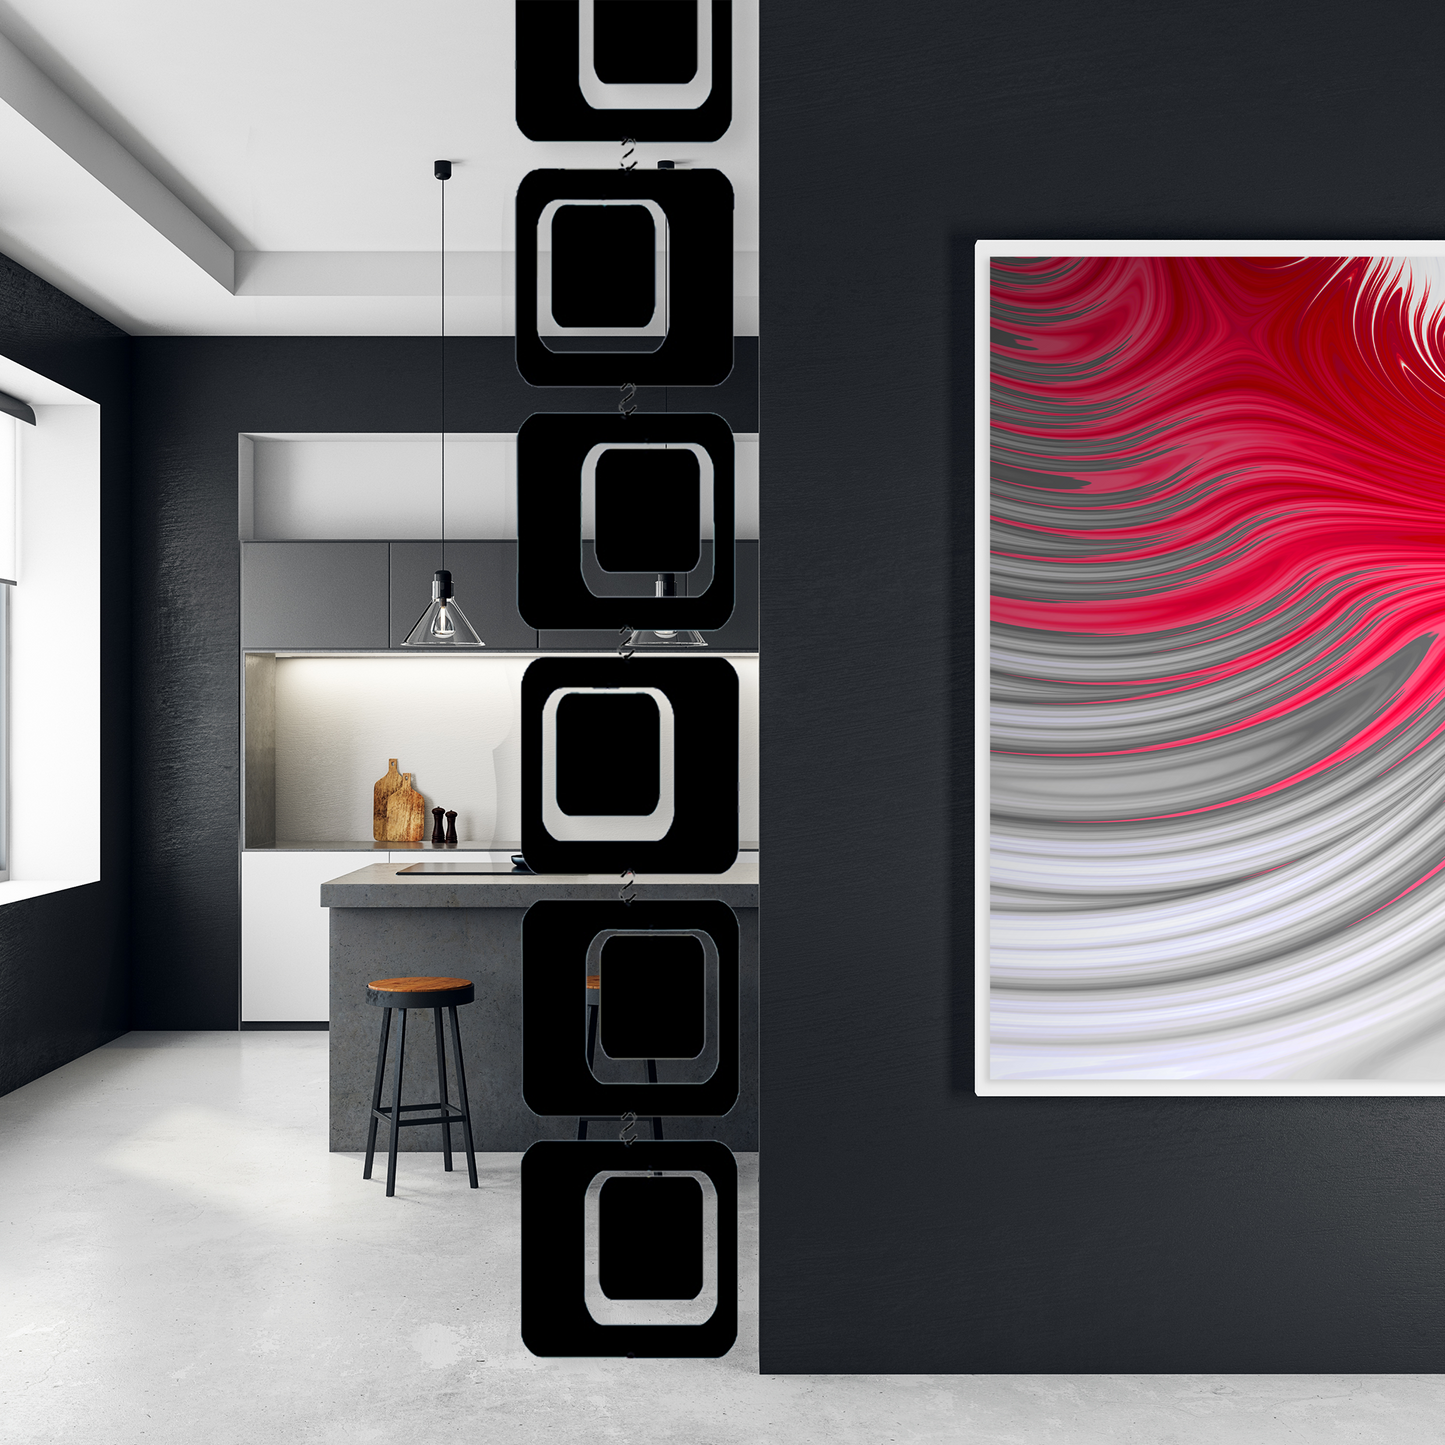 Dramatic Coolsville Vertical Art Mobile in contemporary modern kitchen with colorful abstract framed art  - DIY Kit to make art mobiles and room dividers by AtomicMobiles.com